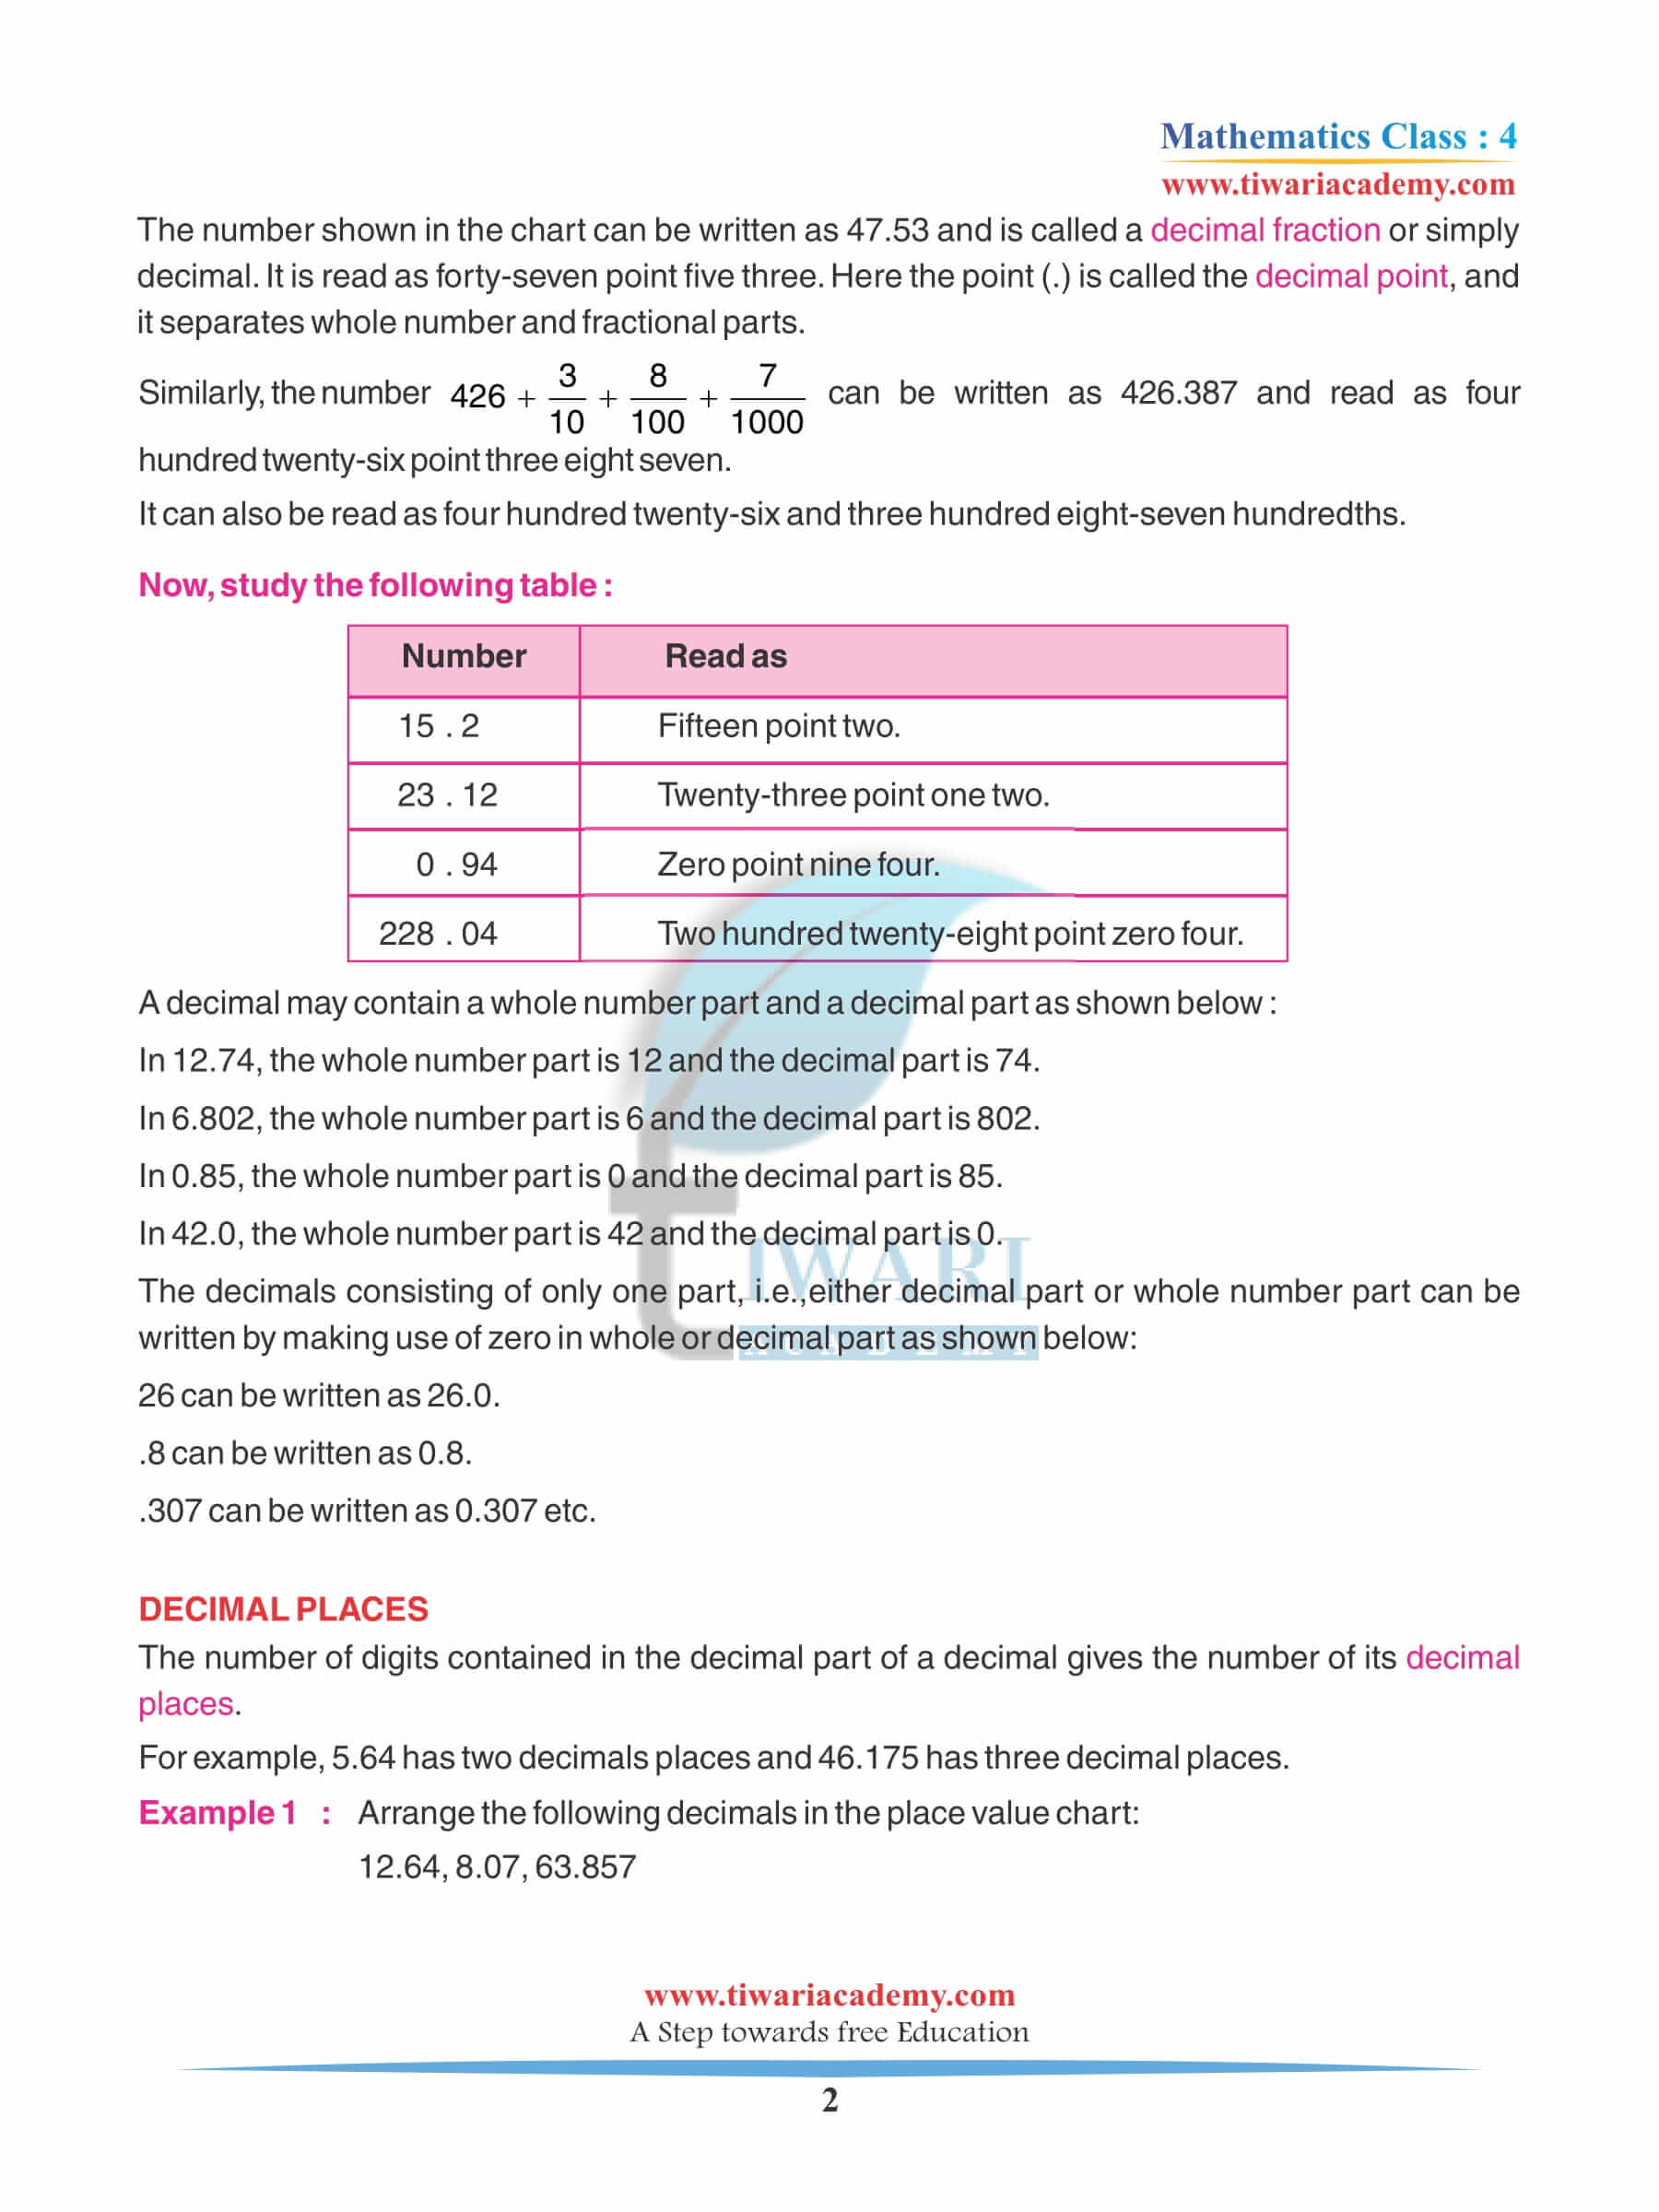 Class 4 Maths Chapter 9 Revision Book questions